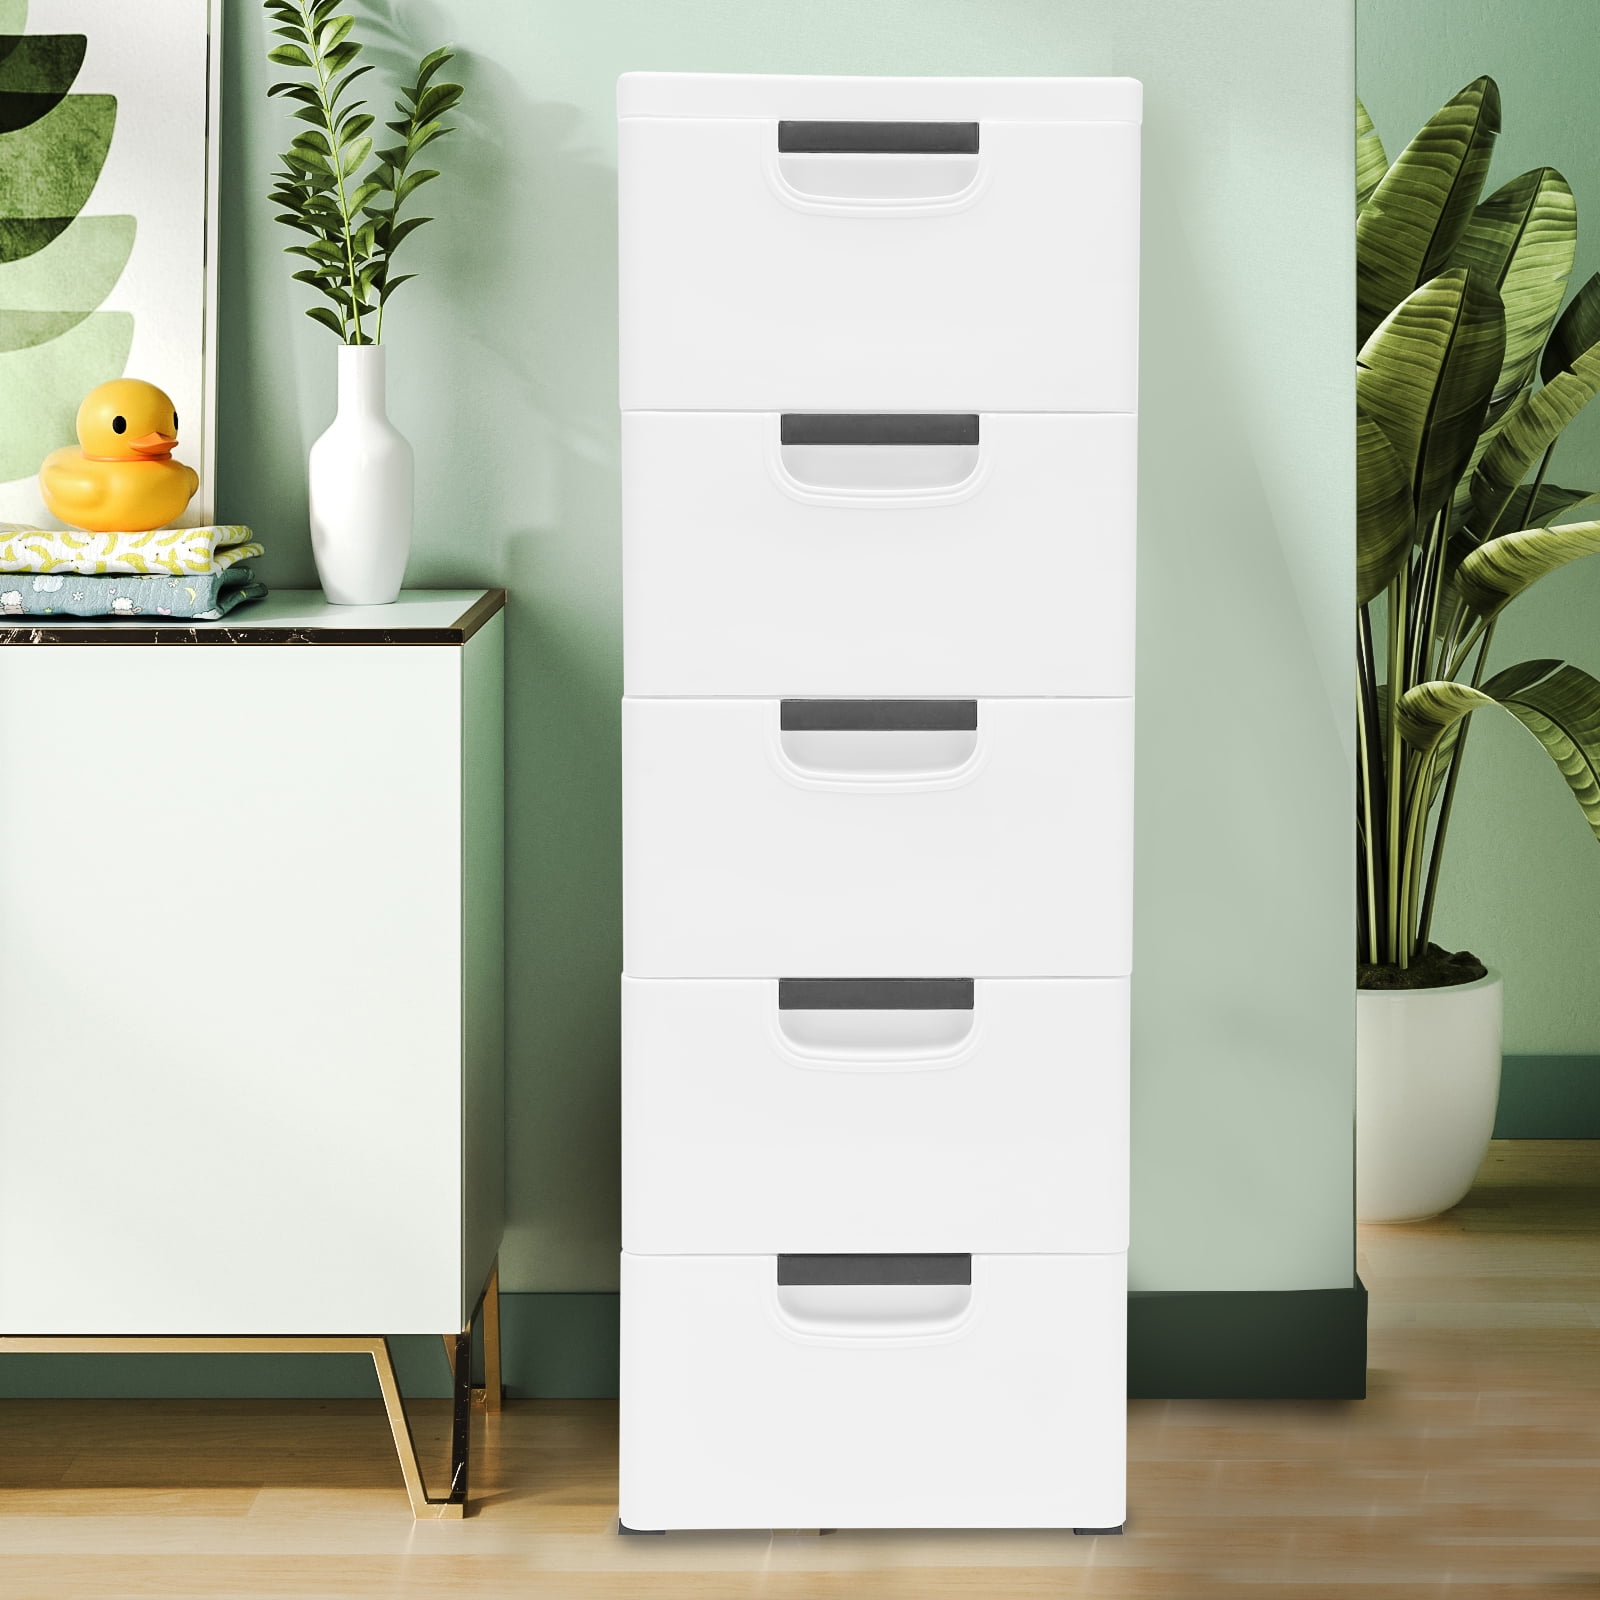 Plastic Drawers Dresser,Storage Cabinet with 6 Drawers,Closet Drawers Tall  Dresser Organizer for Clothes,Playroom,Bedroom Furniture,Stackable Vertical